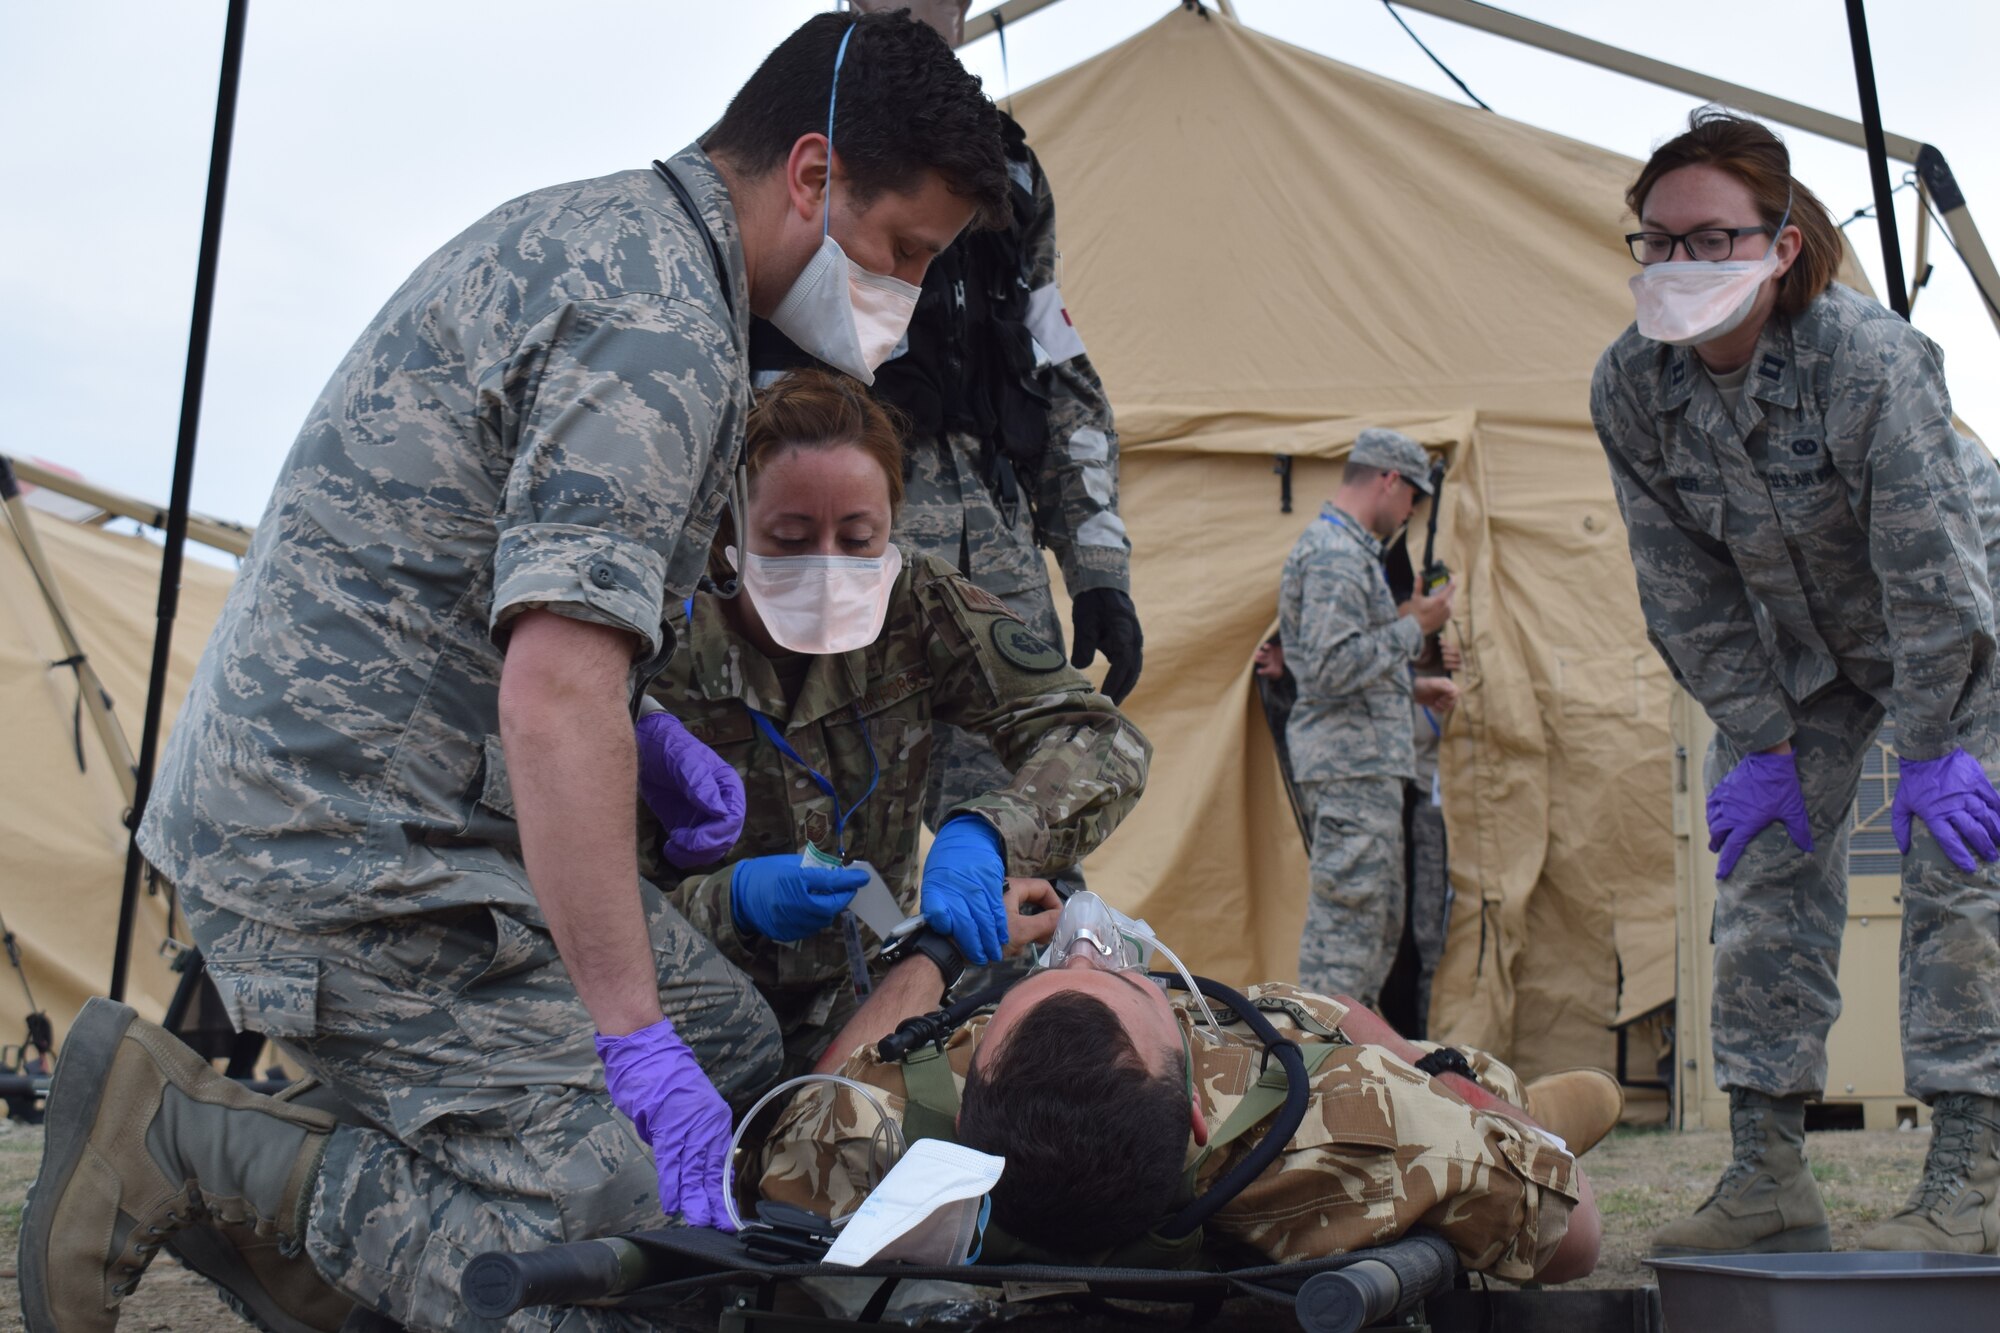 Airmen from the 86th Medical Group, Ramstein Air Base, Germany, participate in a multinational medical exercise drill during Vigorous Warrior 19, Cincu Military Base, Romania, April 8, 2019. Vigorous Warrior 19 is NATO’s largest-ever military medical exercise, uniting more than 2,500 participants from 39 countries to exercise experimental doctrinal concepts and test their medical assets together in a dynamic, multinational environment. (U.S. Air Force photo by 1st Lt. Andrew Layton)